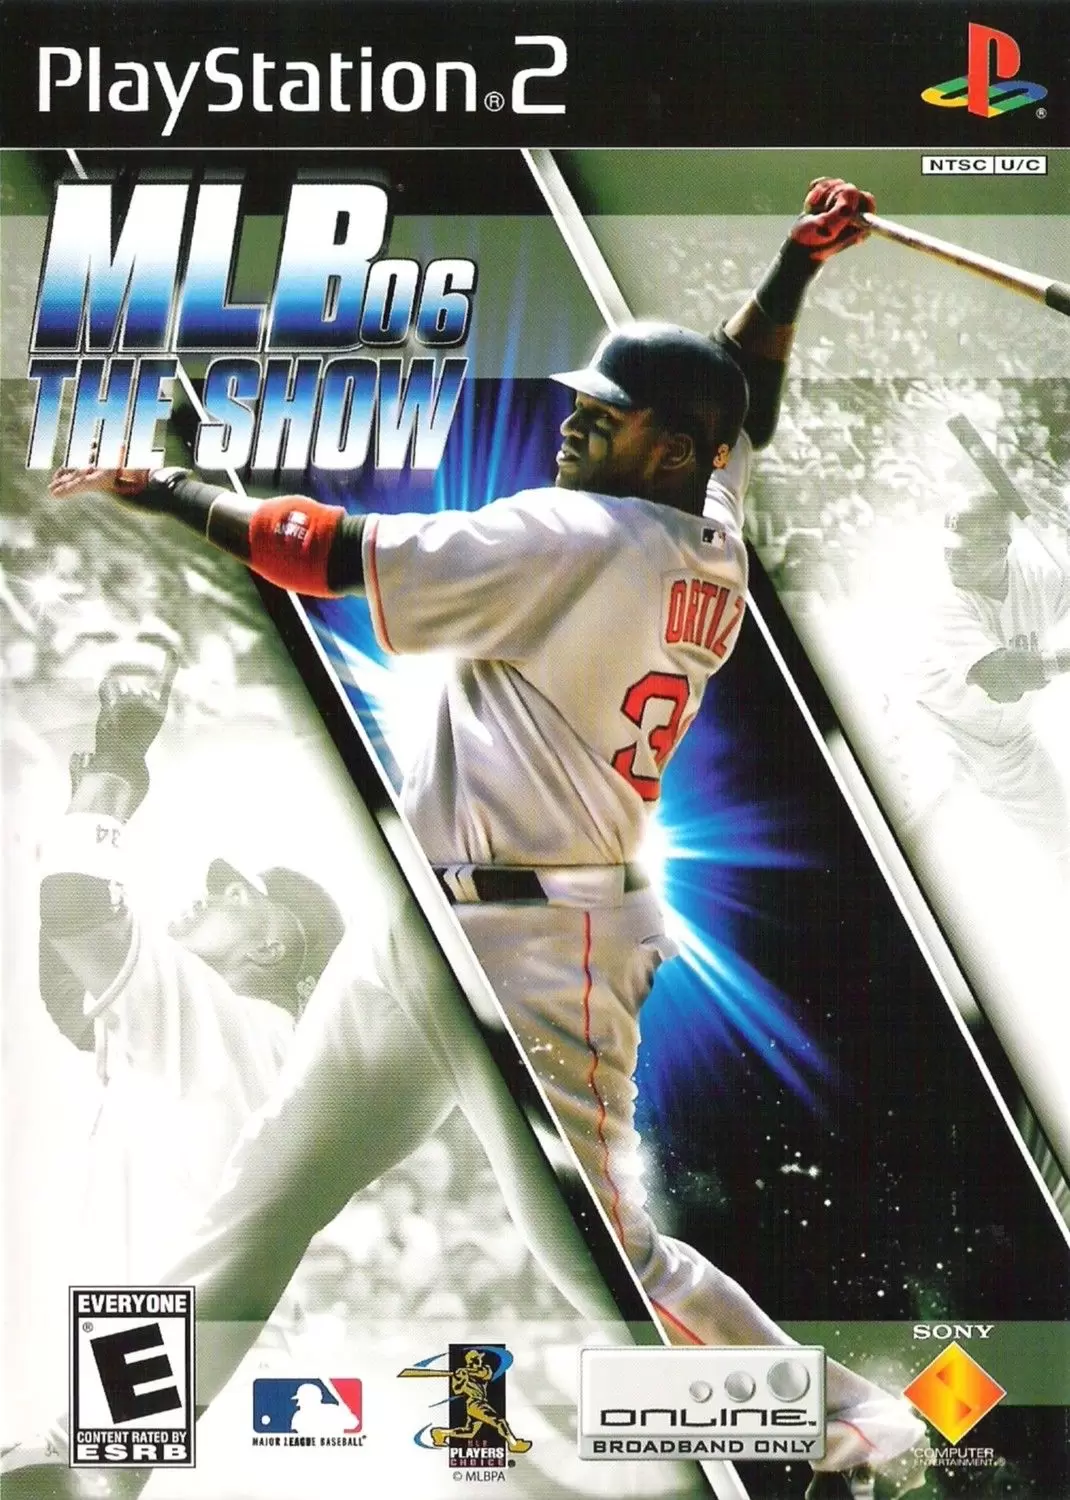 PS2 Games - MLB 06: The Show